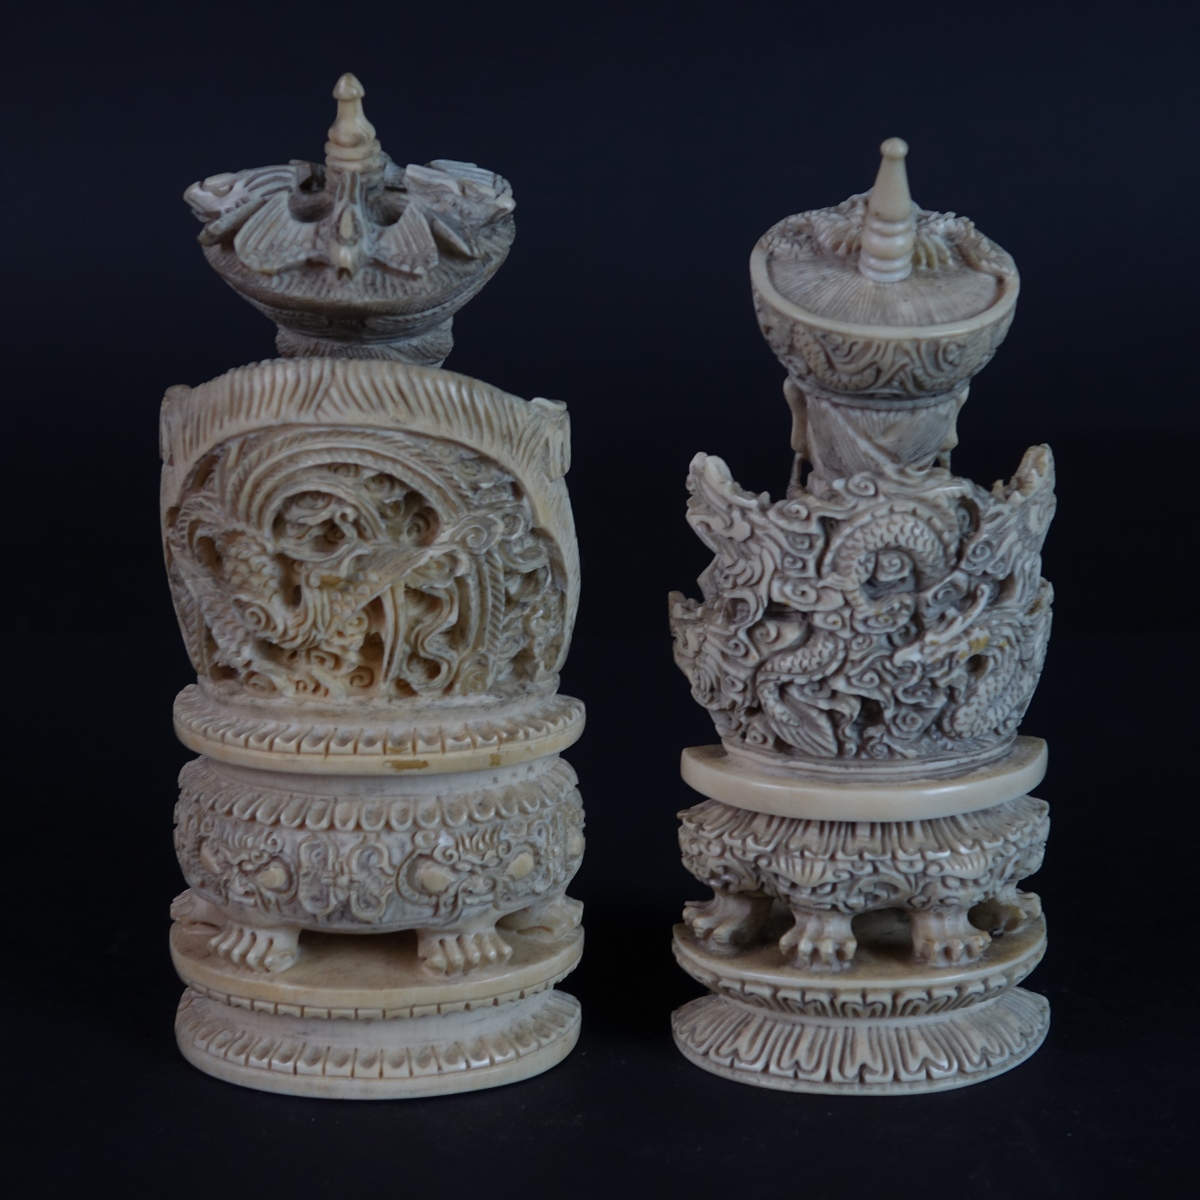 Pair of Chinese Emperor and Empress Figurines